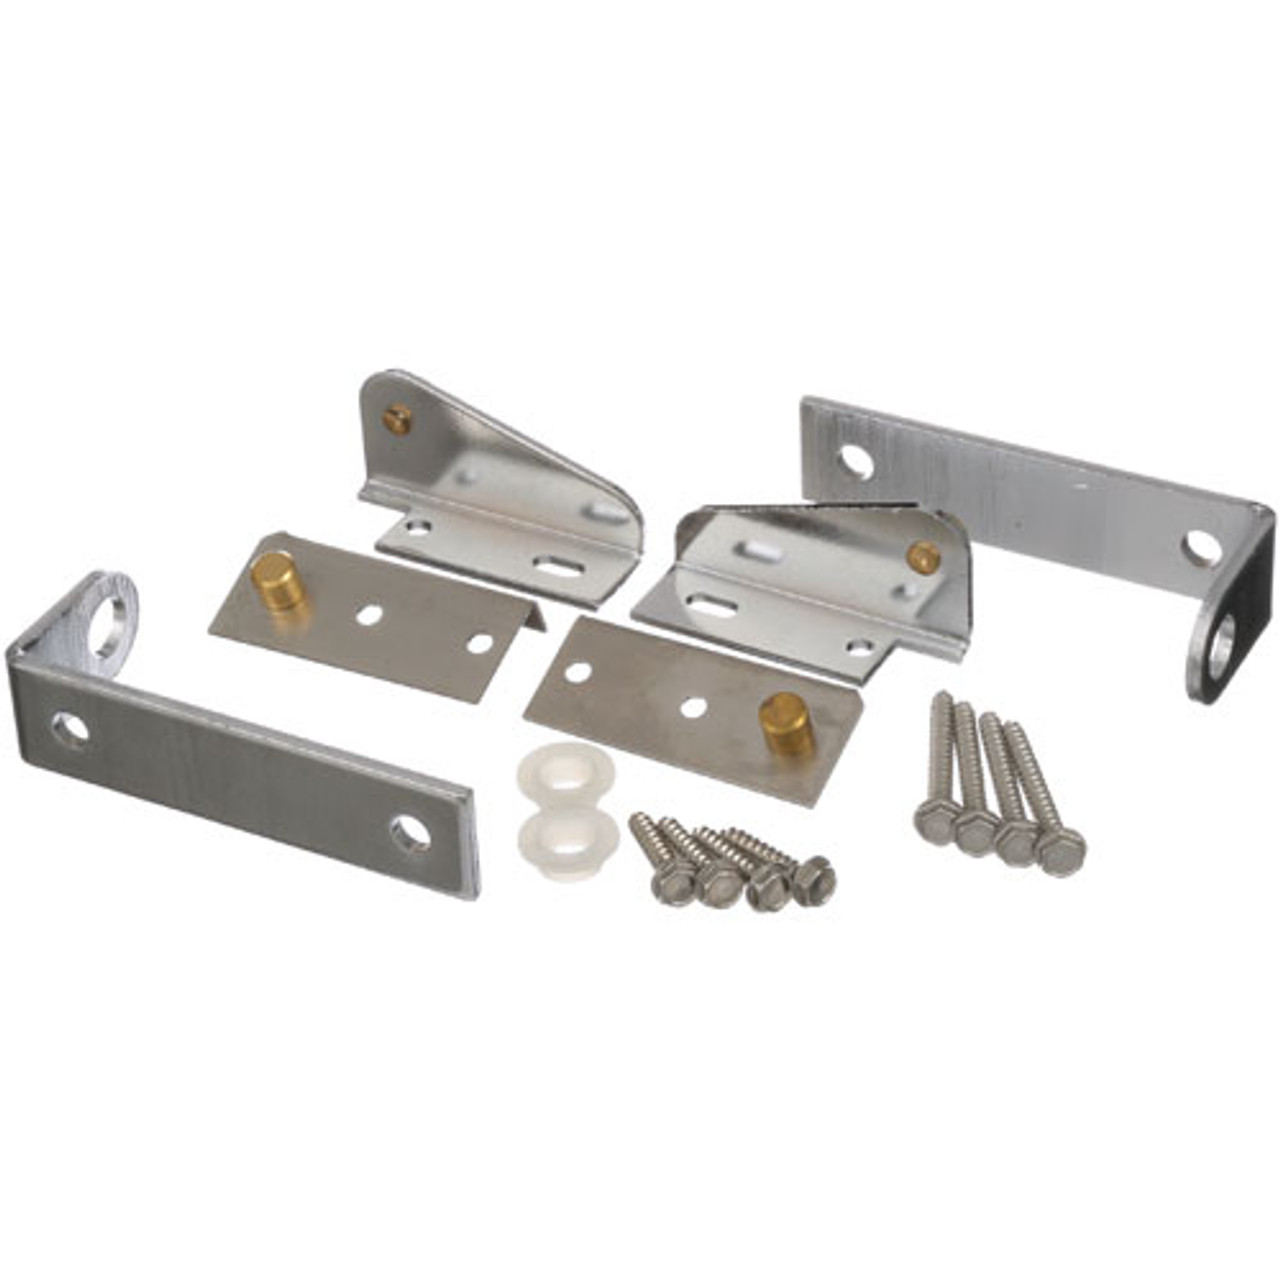 Hinge Kit - Replacement Part For Delfield 42-0067